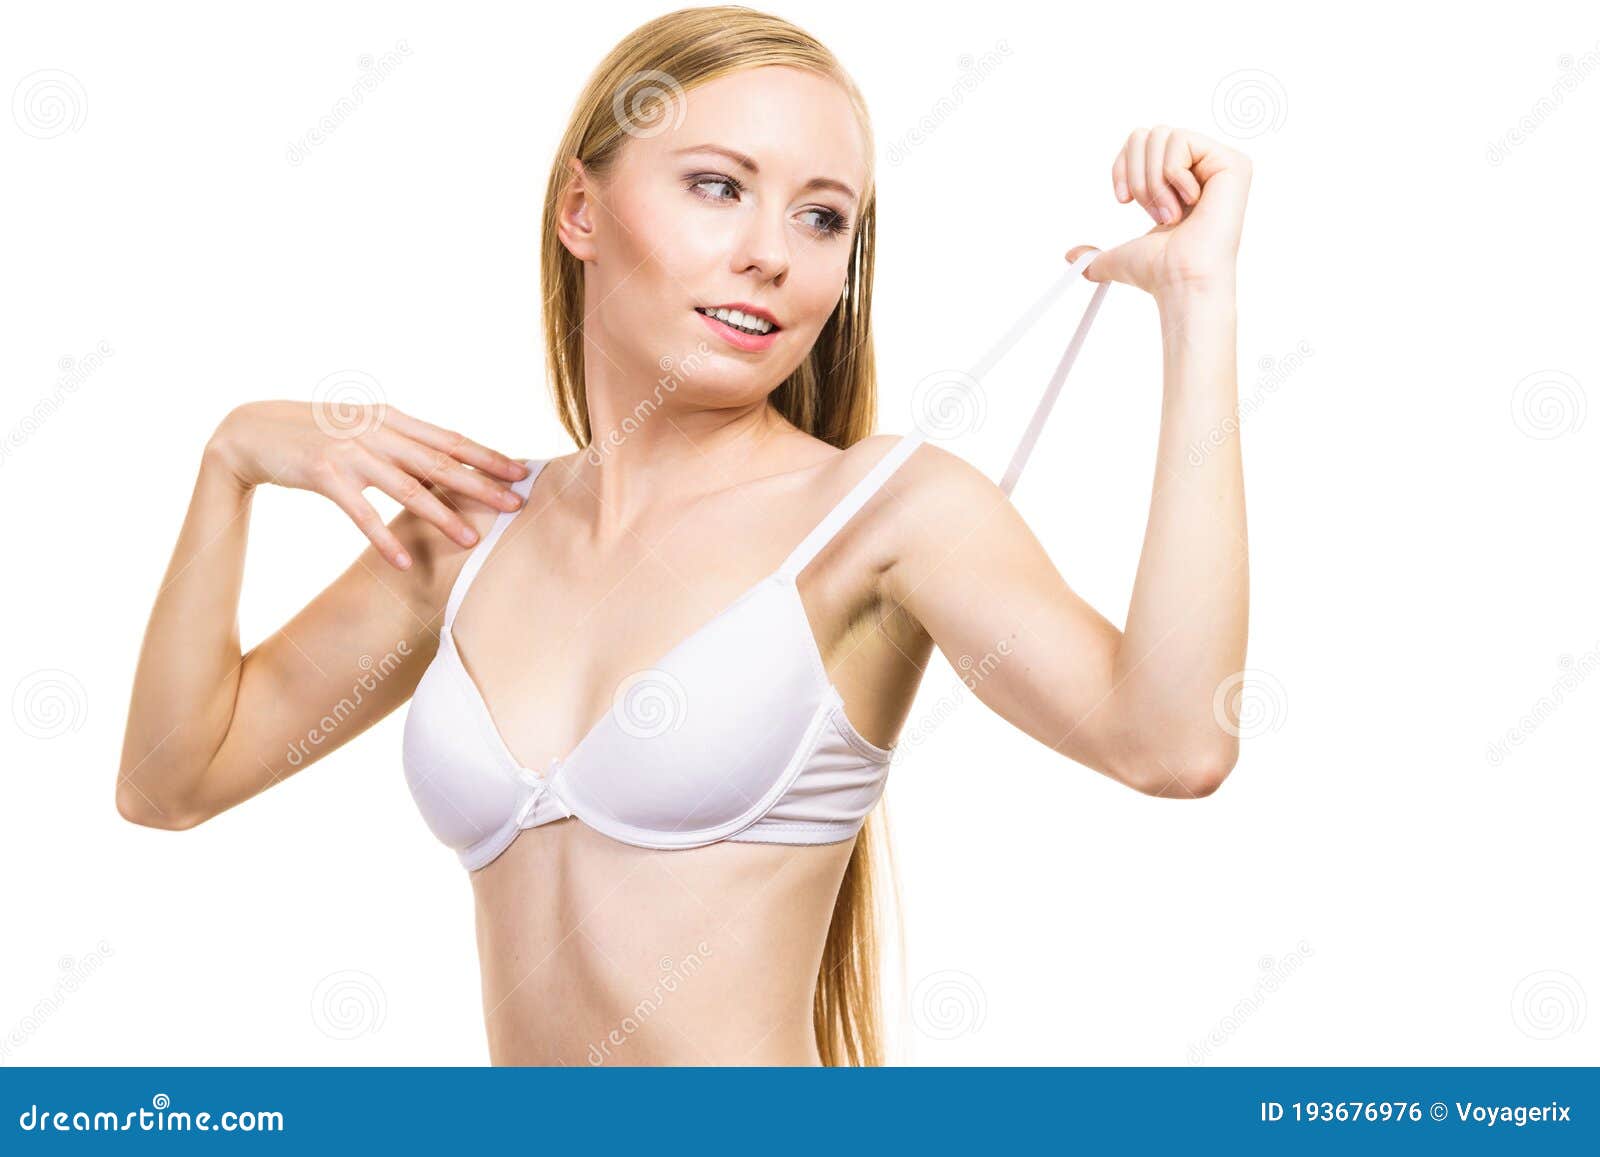 Woman Wearing Wrong Bra Underbust Band Too Wide Female Breast Stock Photo  by ©Voyagerix 360285566